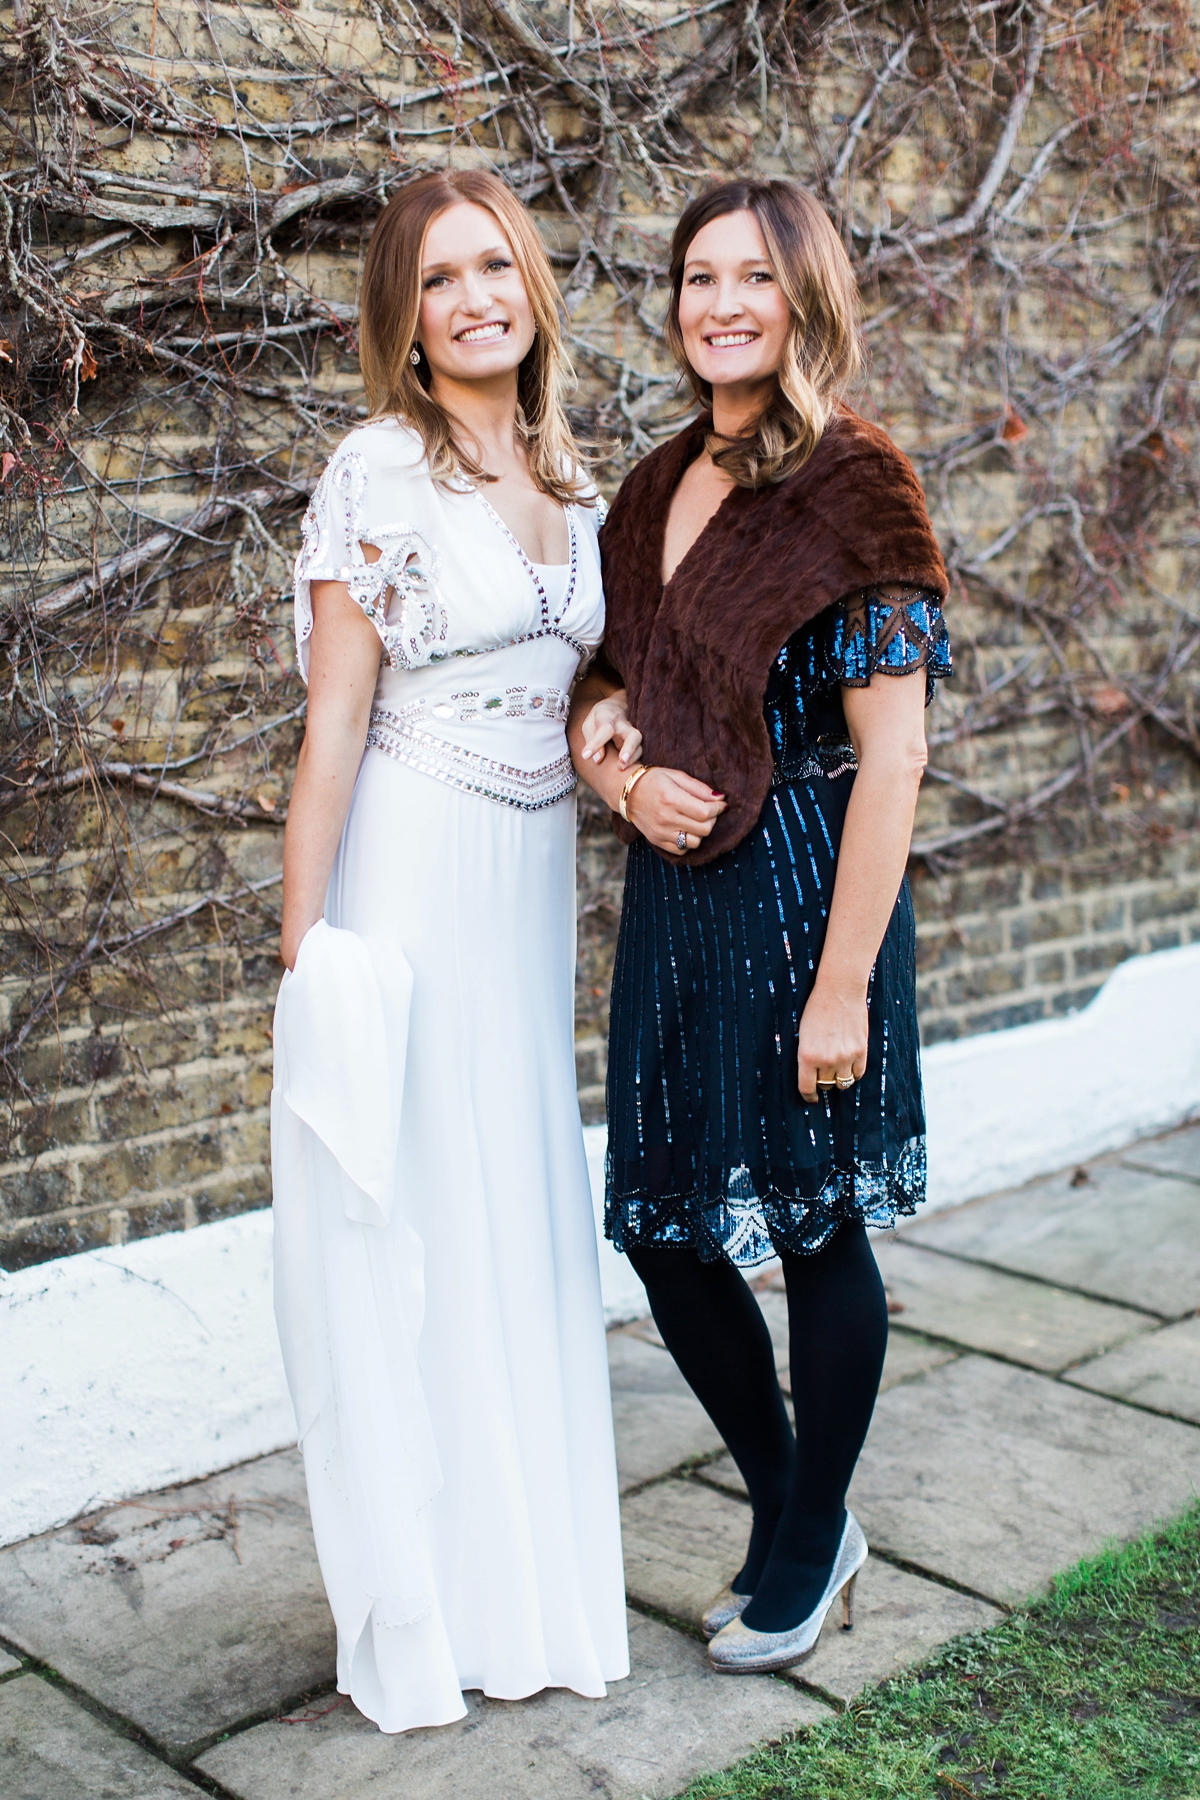 7 A bride in Temperley London for a sophisticated and elegant Winter wedding